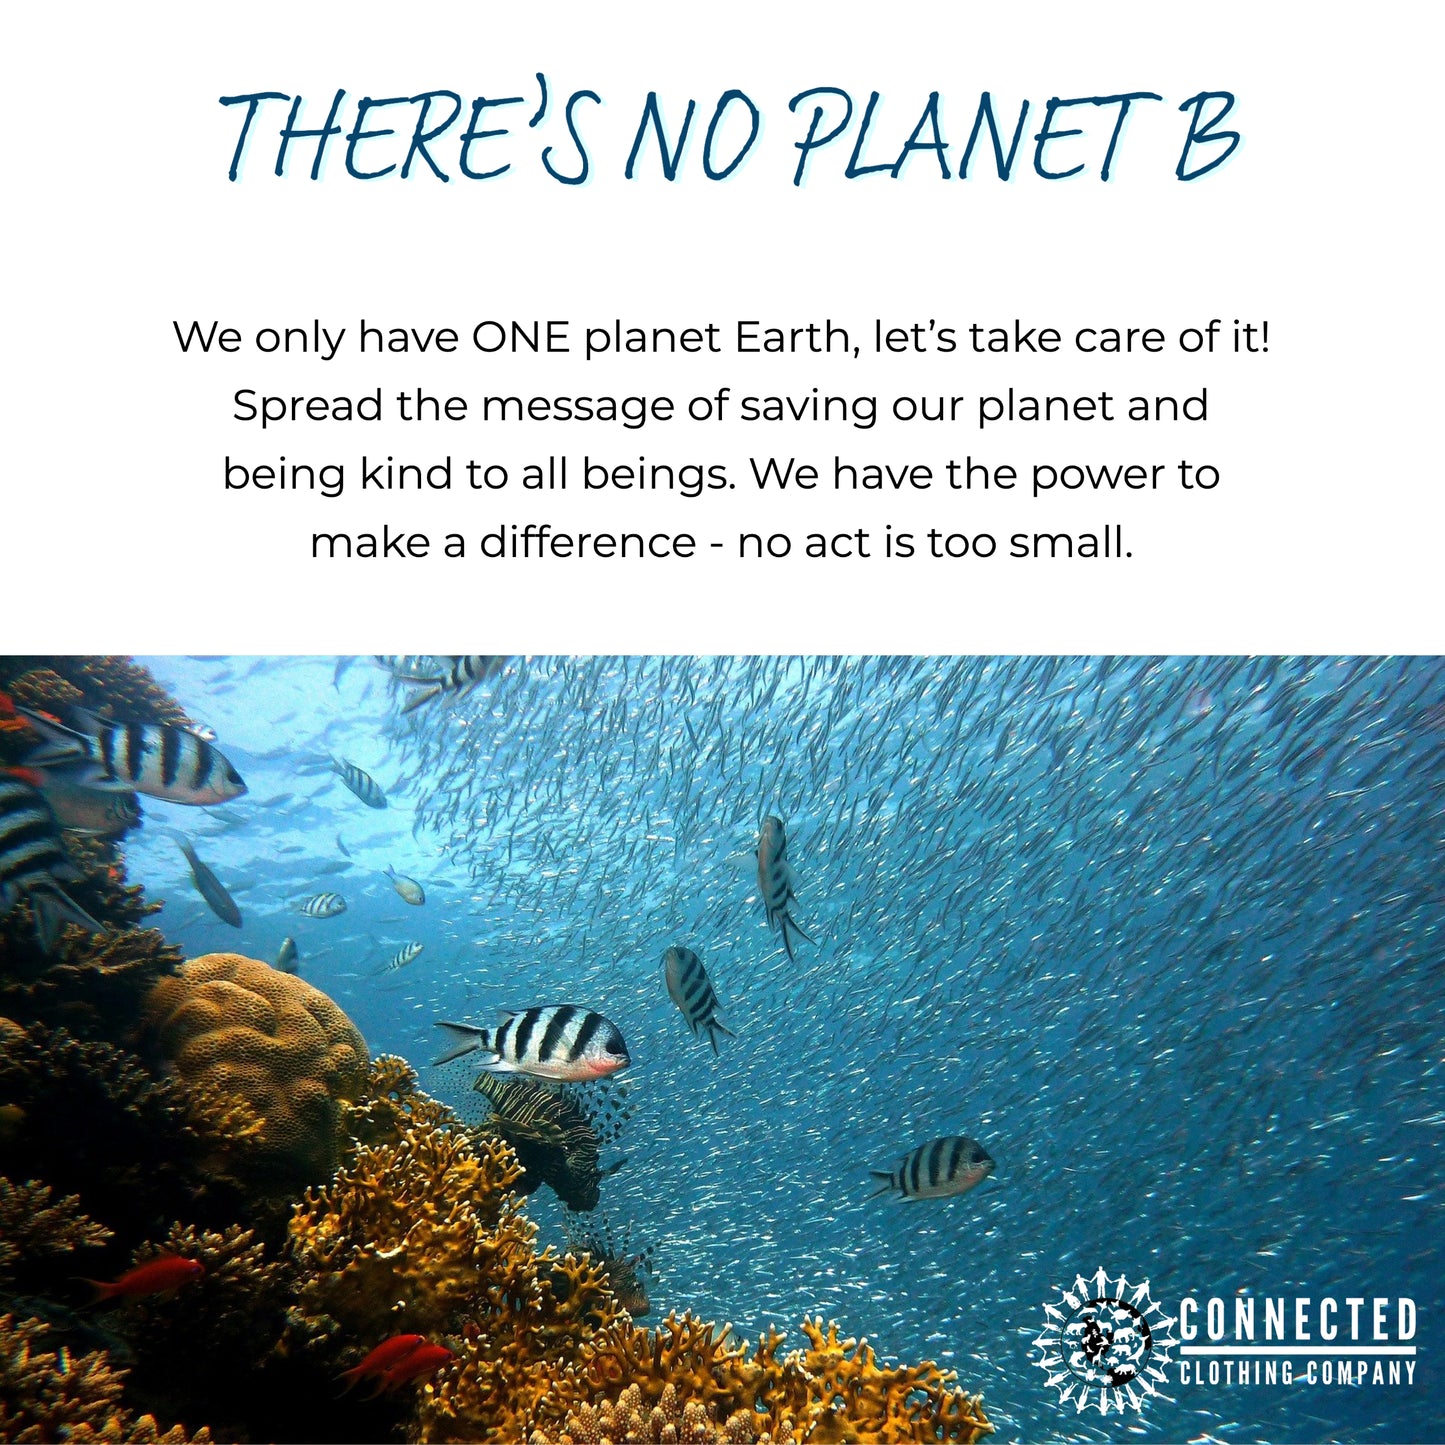 there's no planet b. we only have one planet earth, let's take care of it! Spread the message of saving our planet and being kind to all beings. We have the power to make a difference - no act is too small.